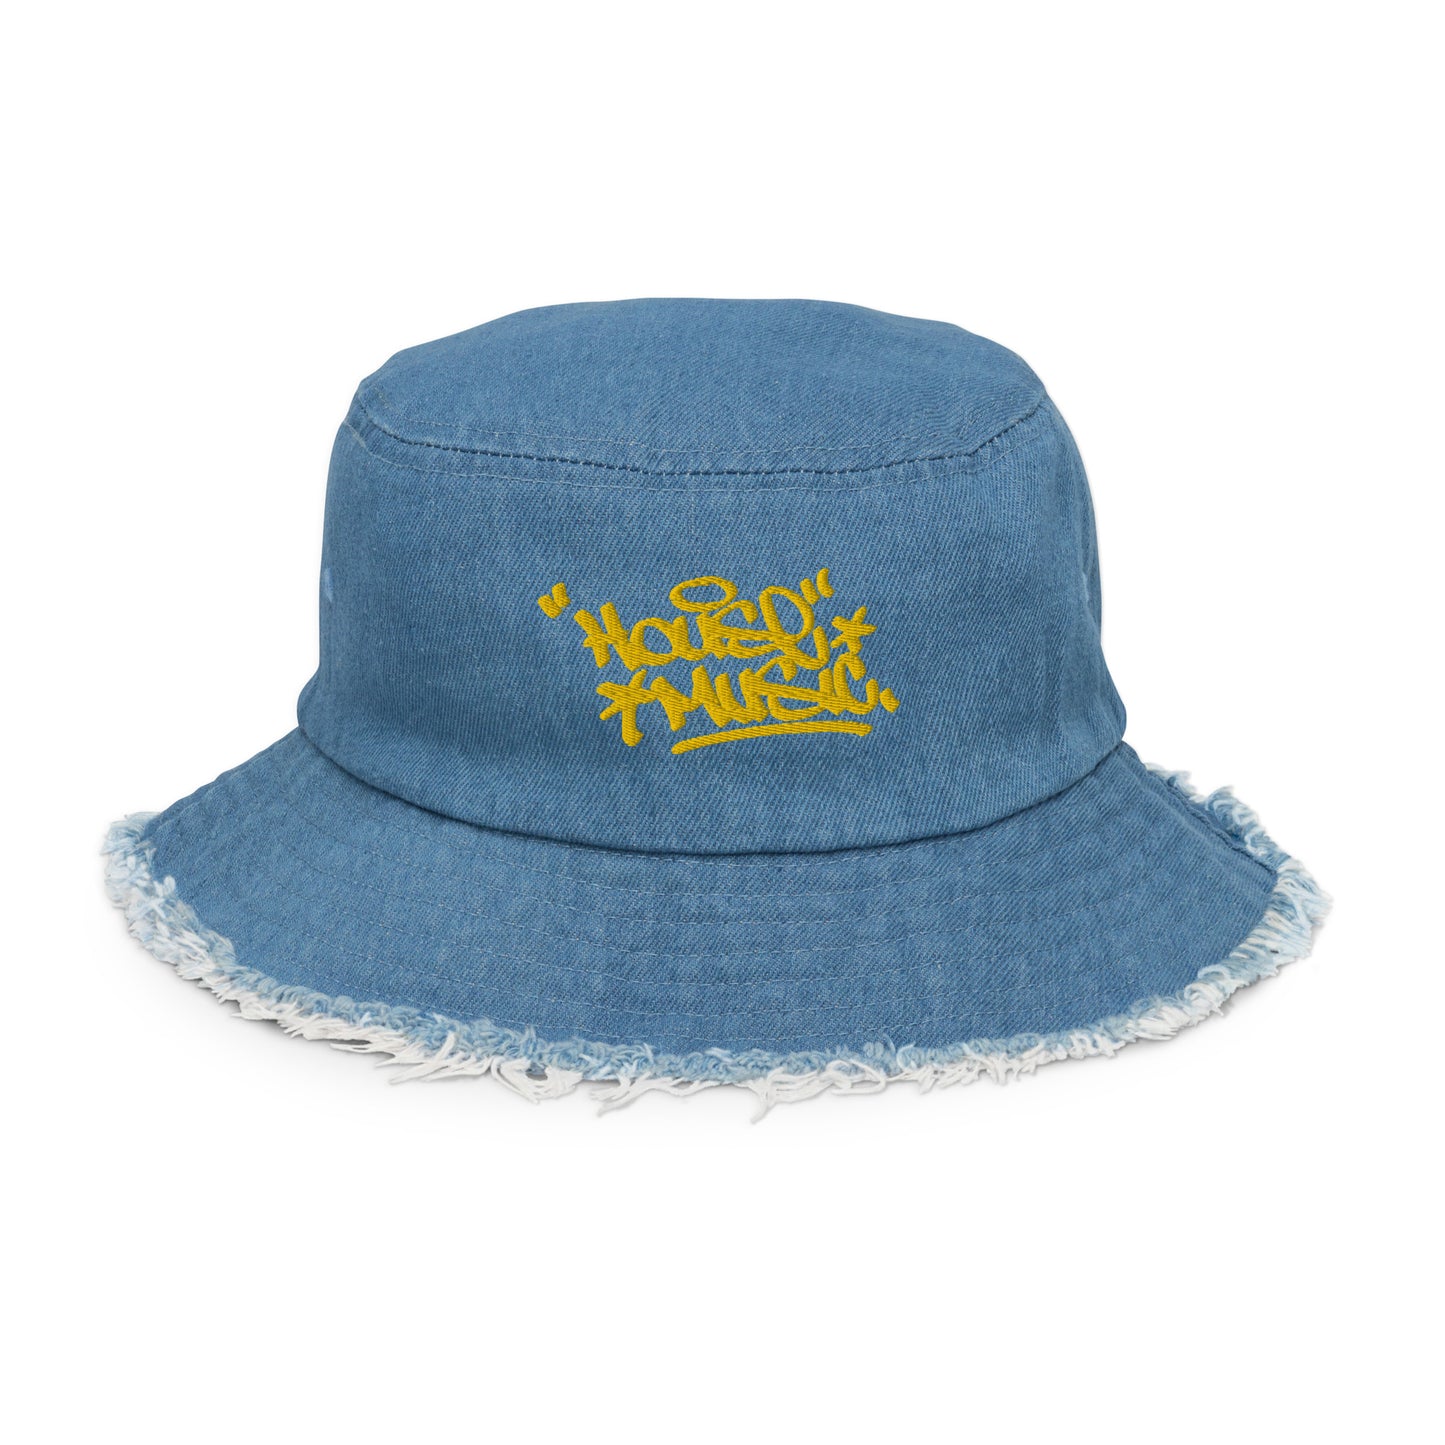 House Music Distressed  Embroidered denim bucket hat tagged by NYC "The Legend" James Top